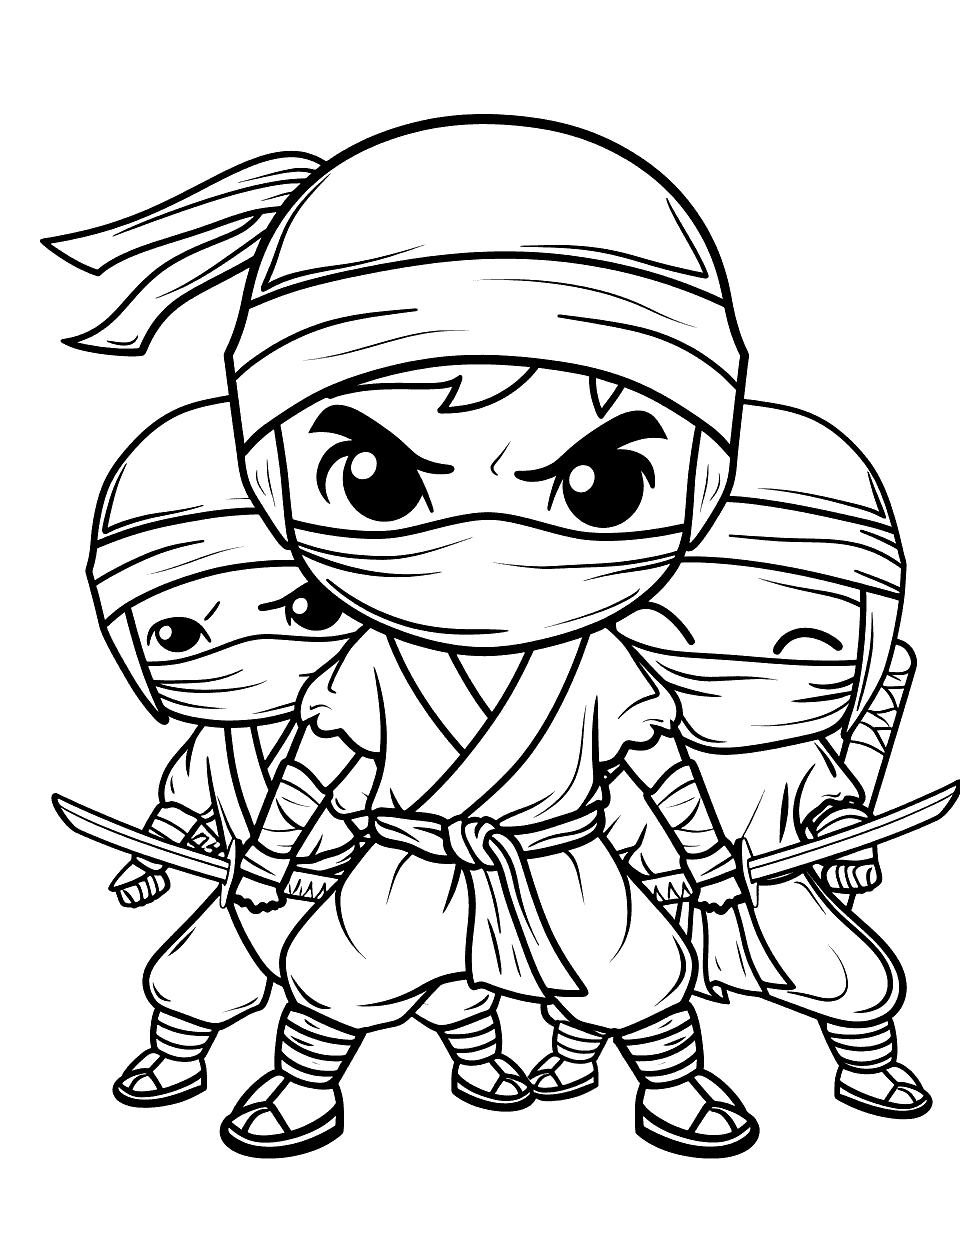 Kids as Ninja Team Coloring Page - A group of kids dressed in ninja outfits, ready for action.